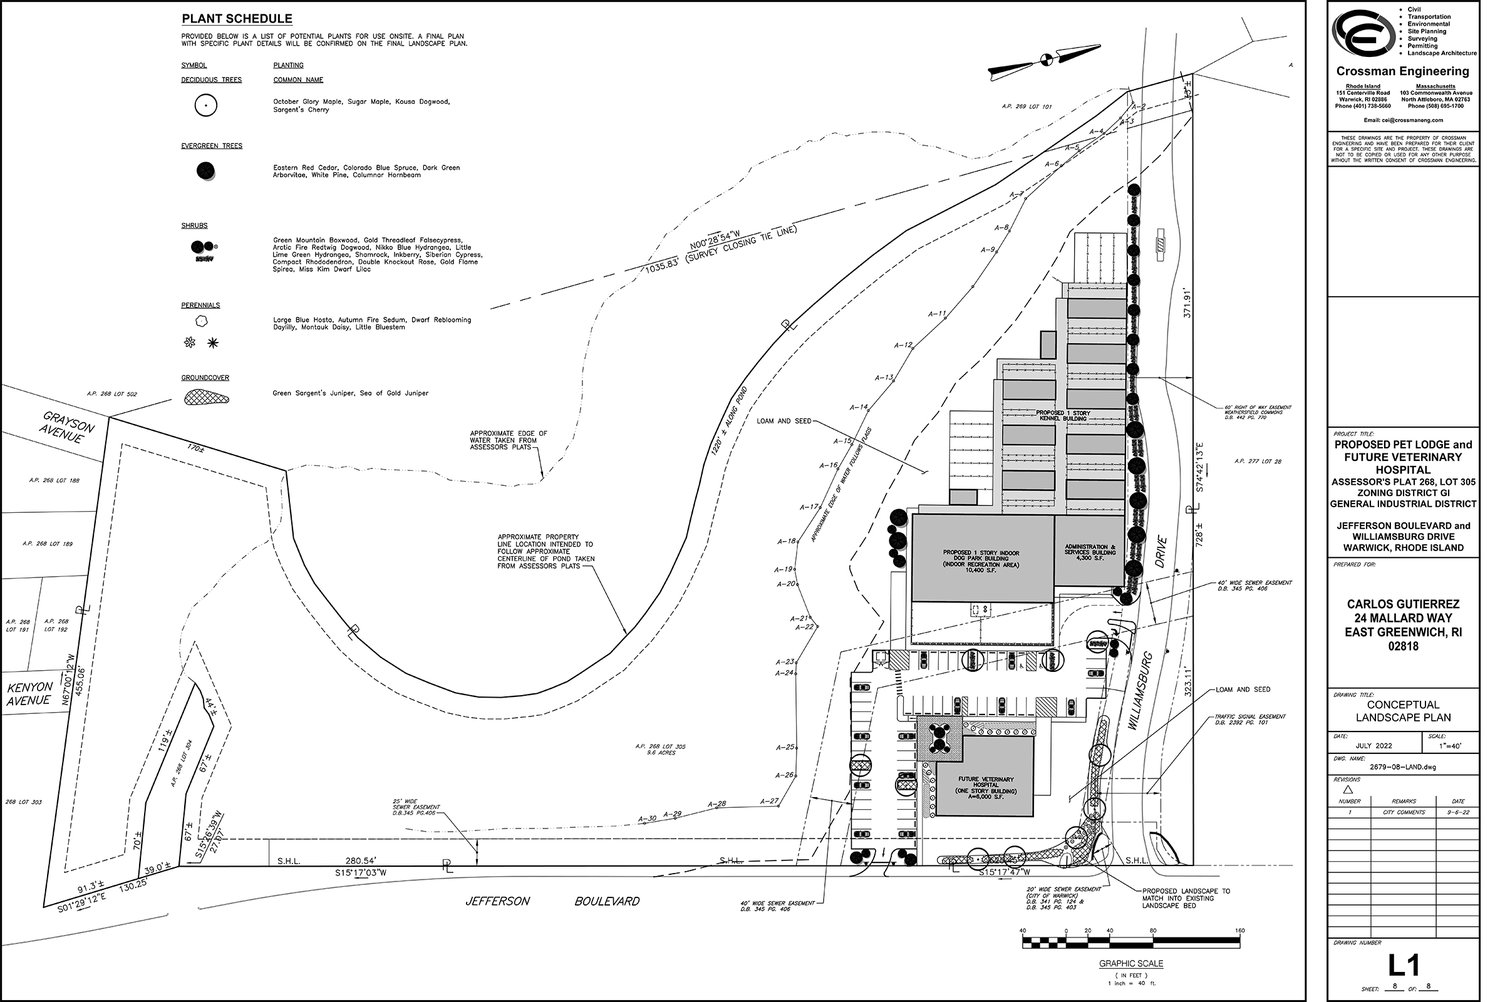 POSSIBLE SITE FOR PET LODGE:  An engineering drawing offers a possible layout for a pet lodge and veterinary hospital. A Jefferson Boulevard entrance rather than Williamsburg Drive shown here is being explored.